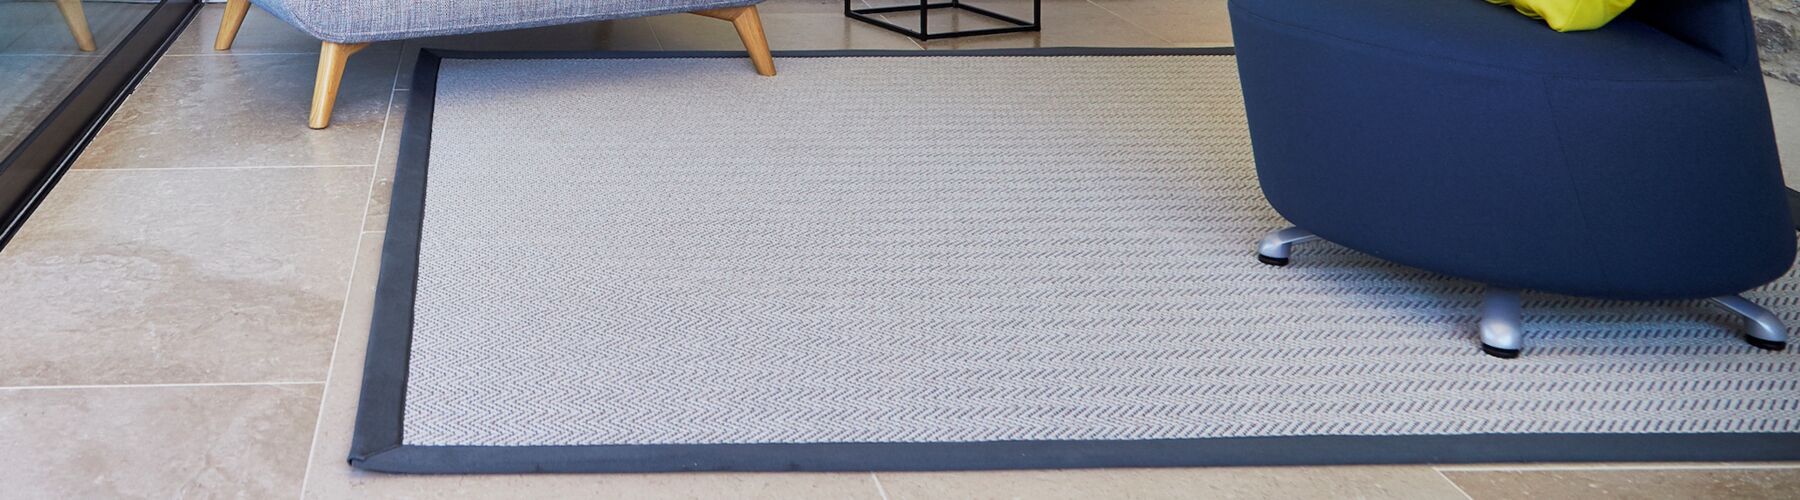 How to Stop Your Rug from Slipping